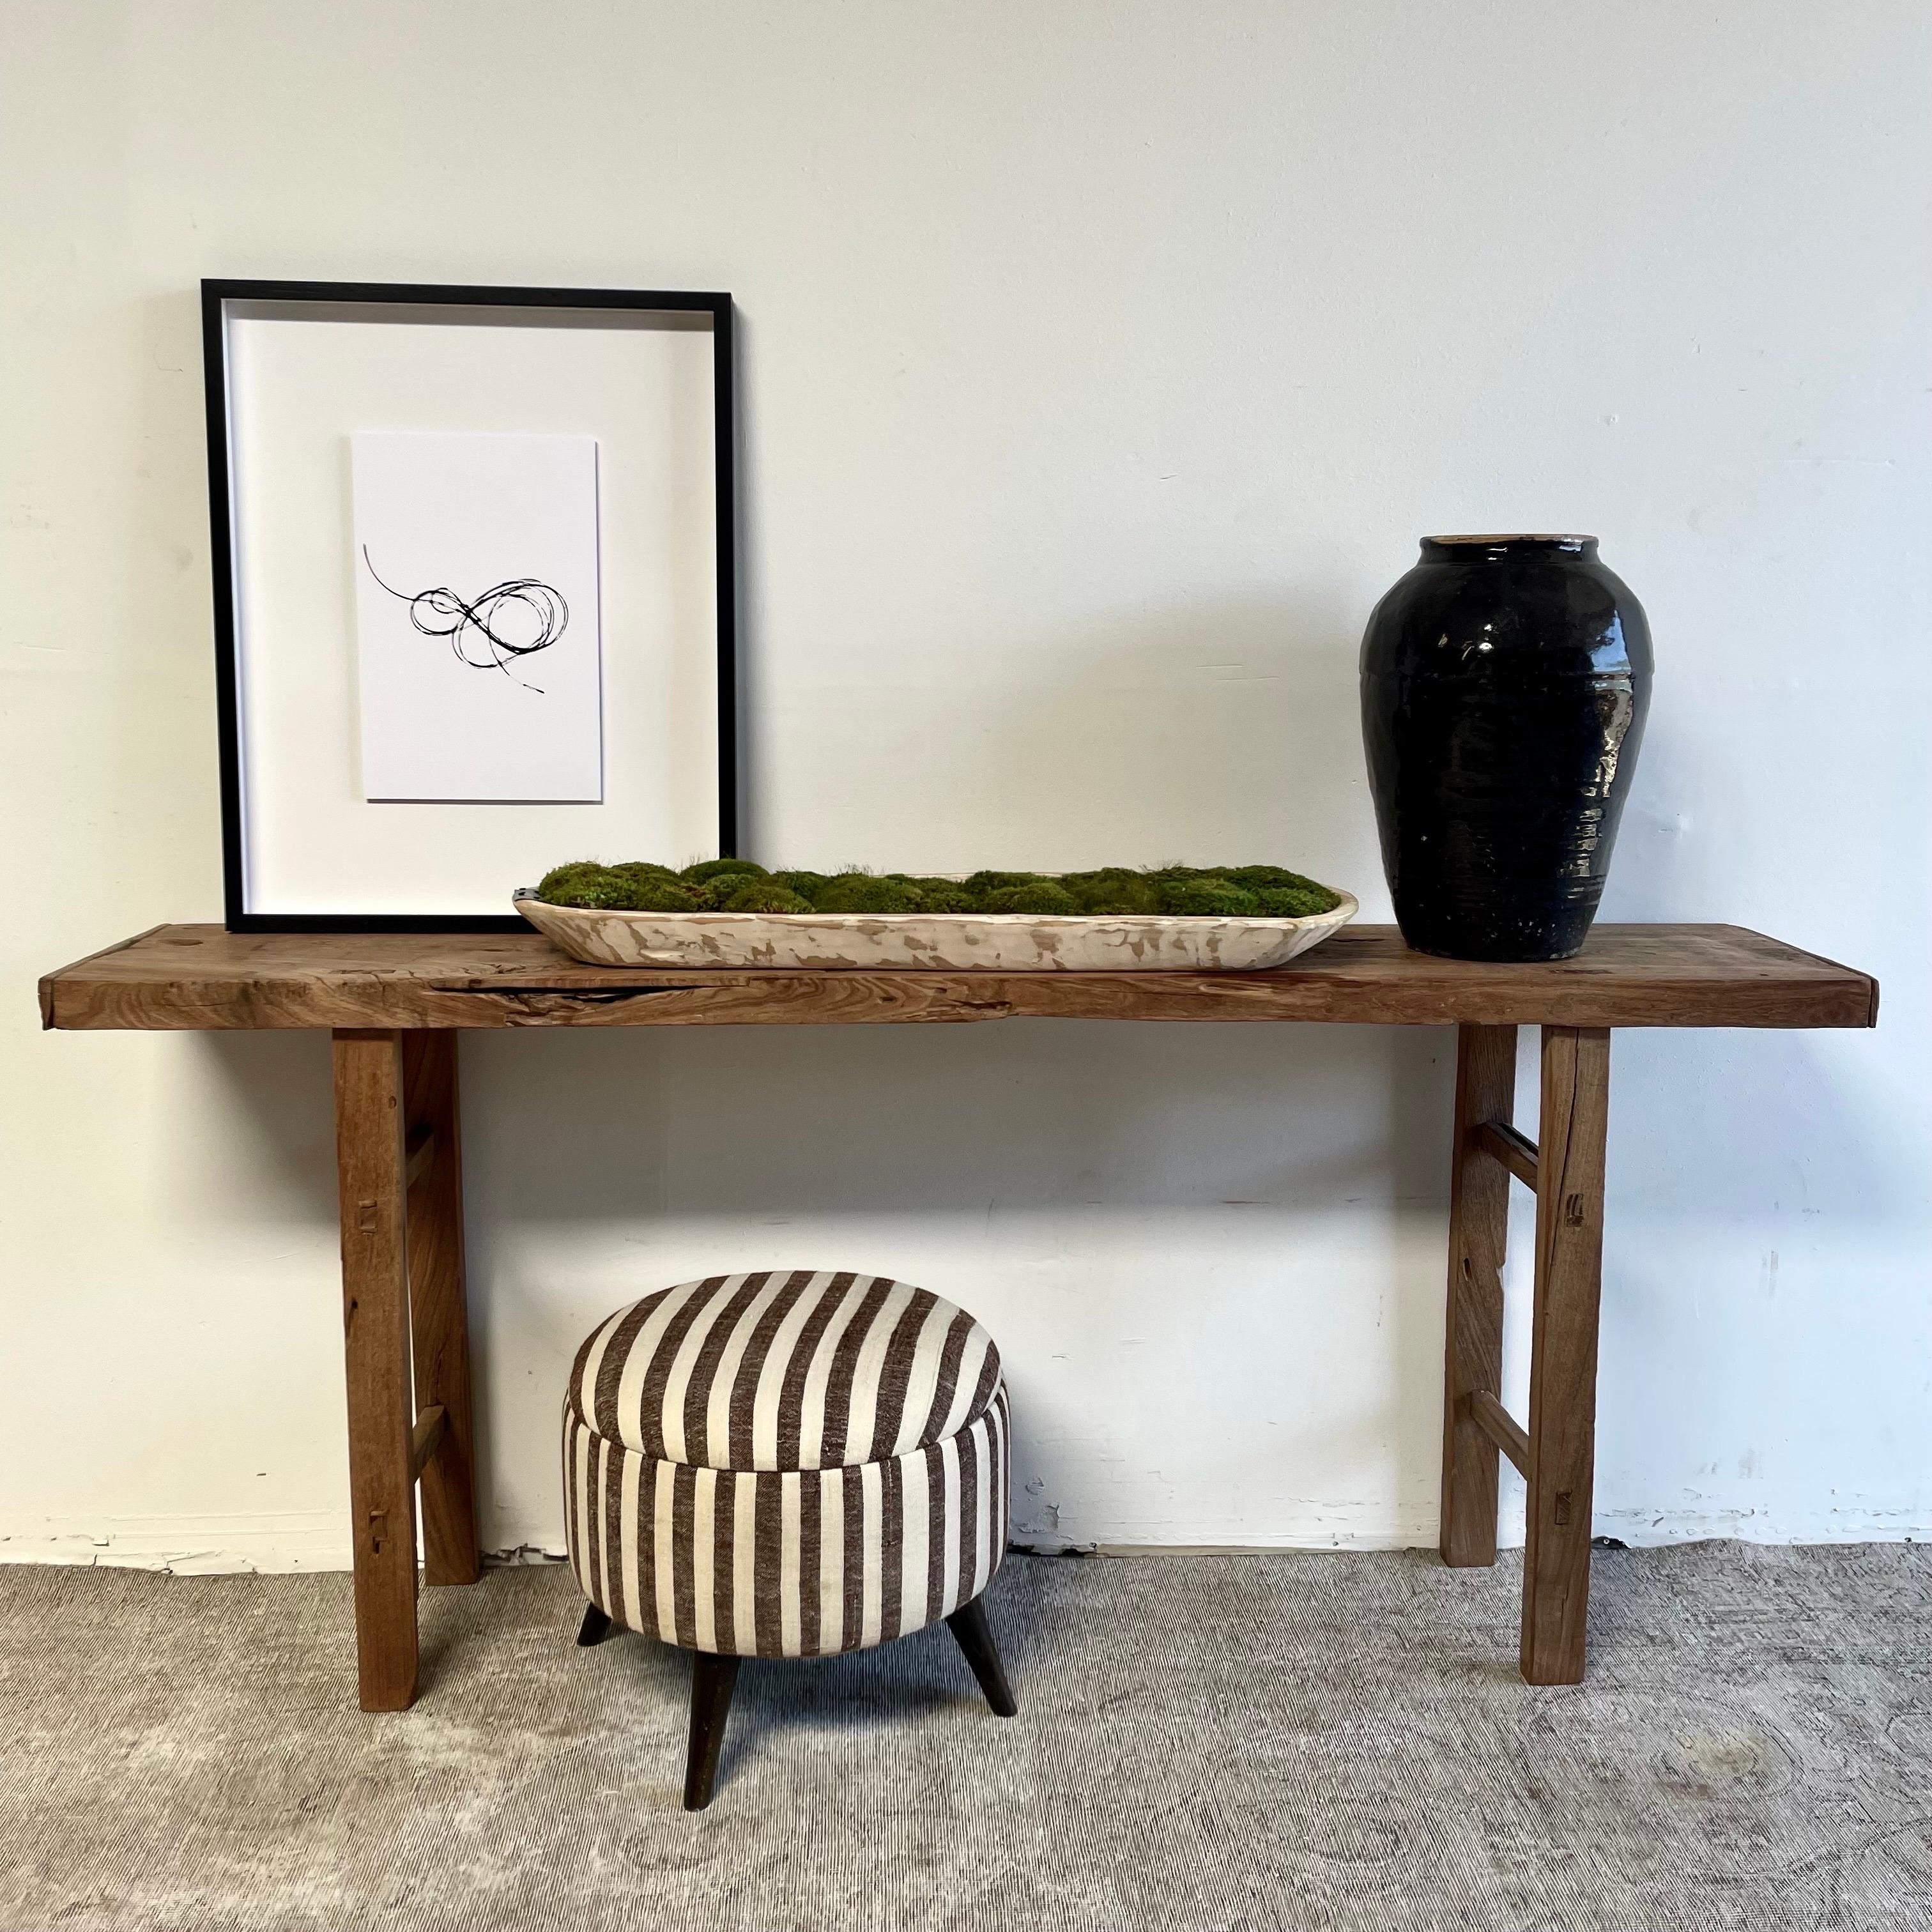 Vintage Antique Elm Wood console table
Made from Vintage reclaimed elm wood. Beautiful antique patina, with weathering and age, these are solid and sturdy ready for daily use, use as a entry table, sofa table or console in a dining room. Great in a